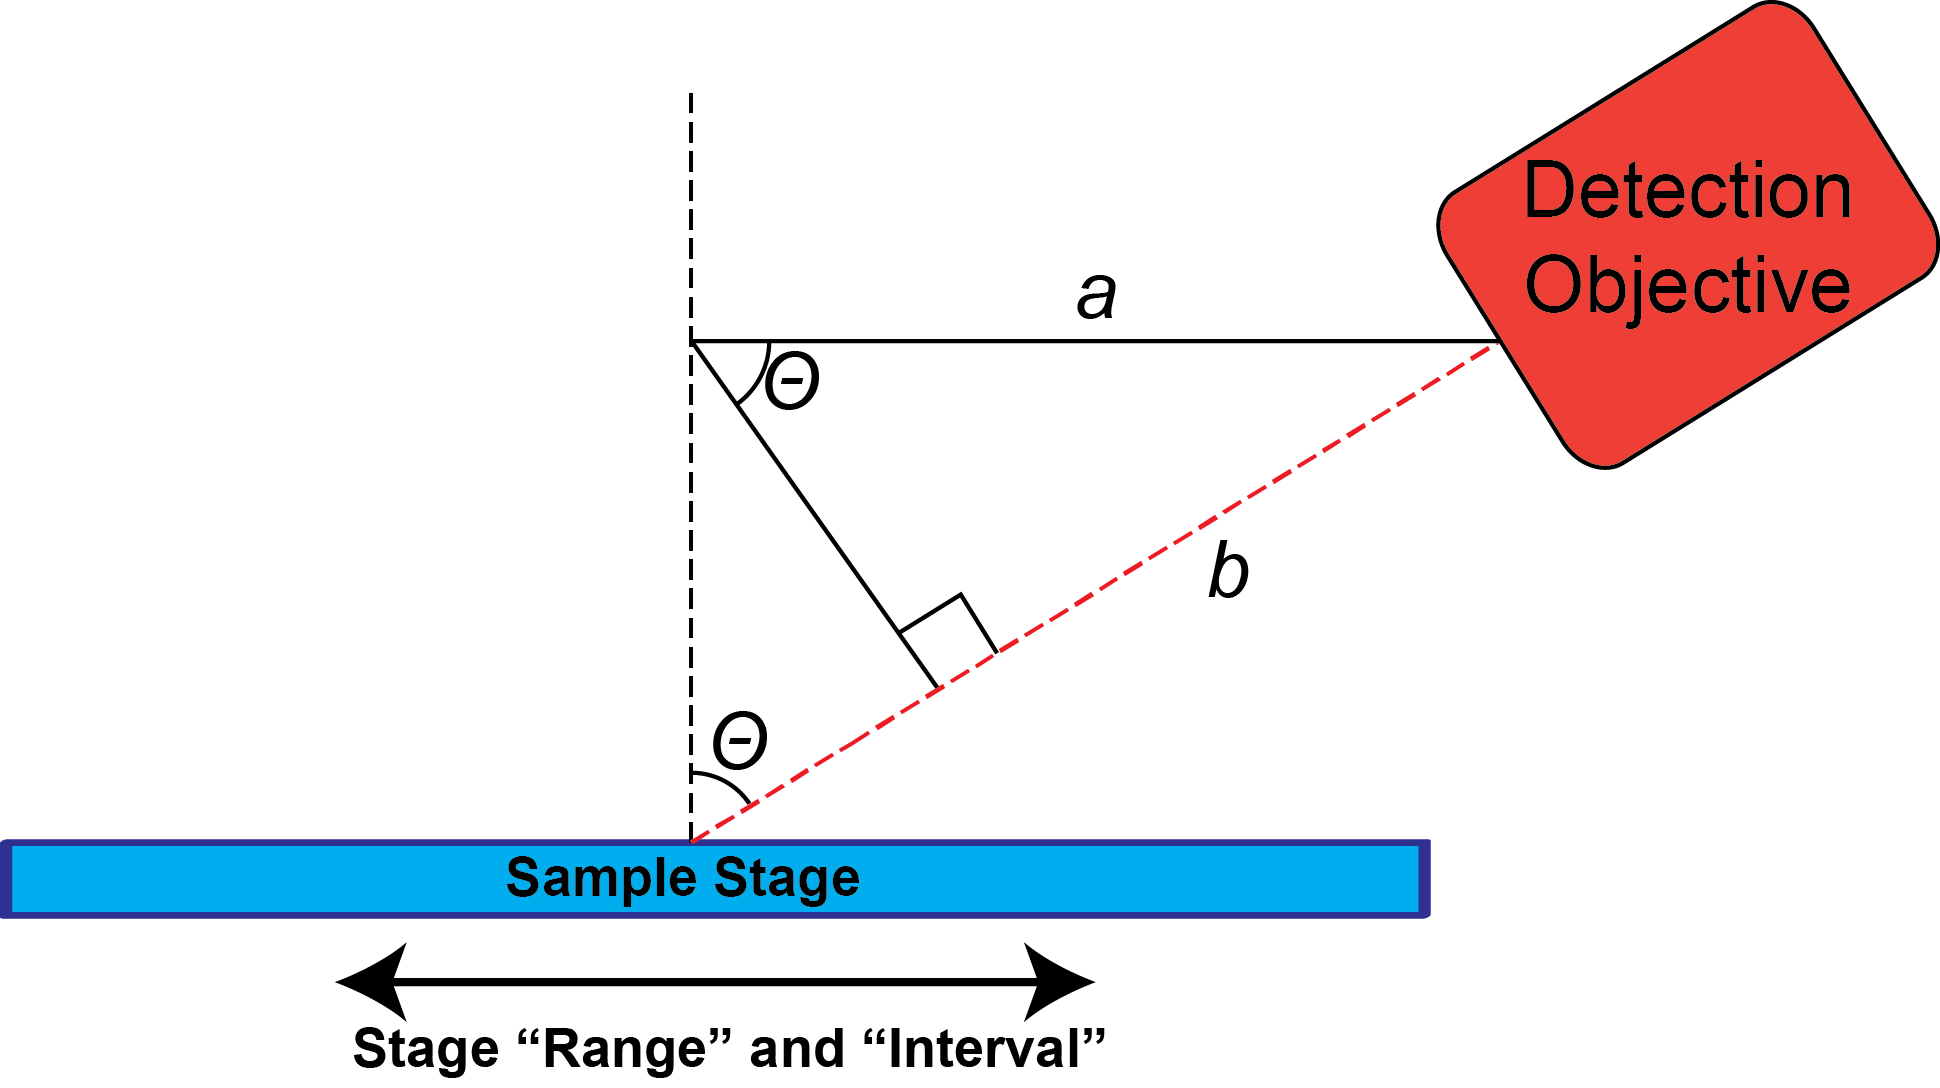 Figure 3. Schematic demonstrating orientation of detection objective relative to the sample stage.